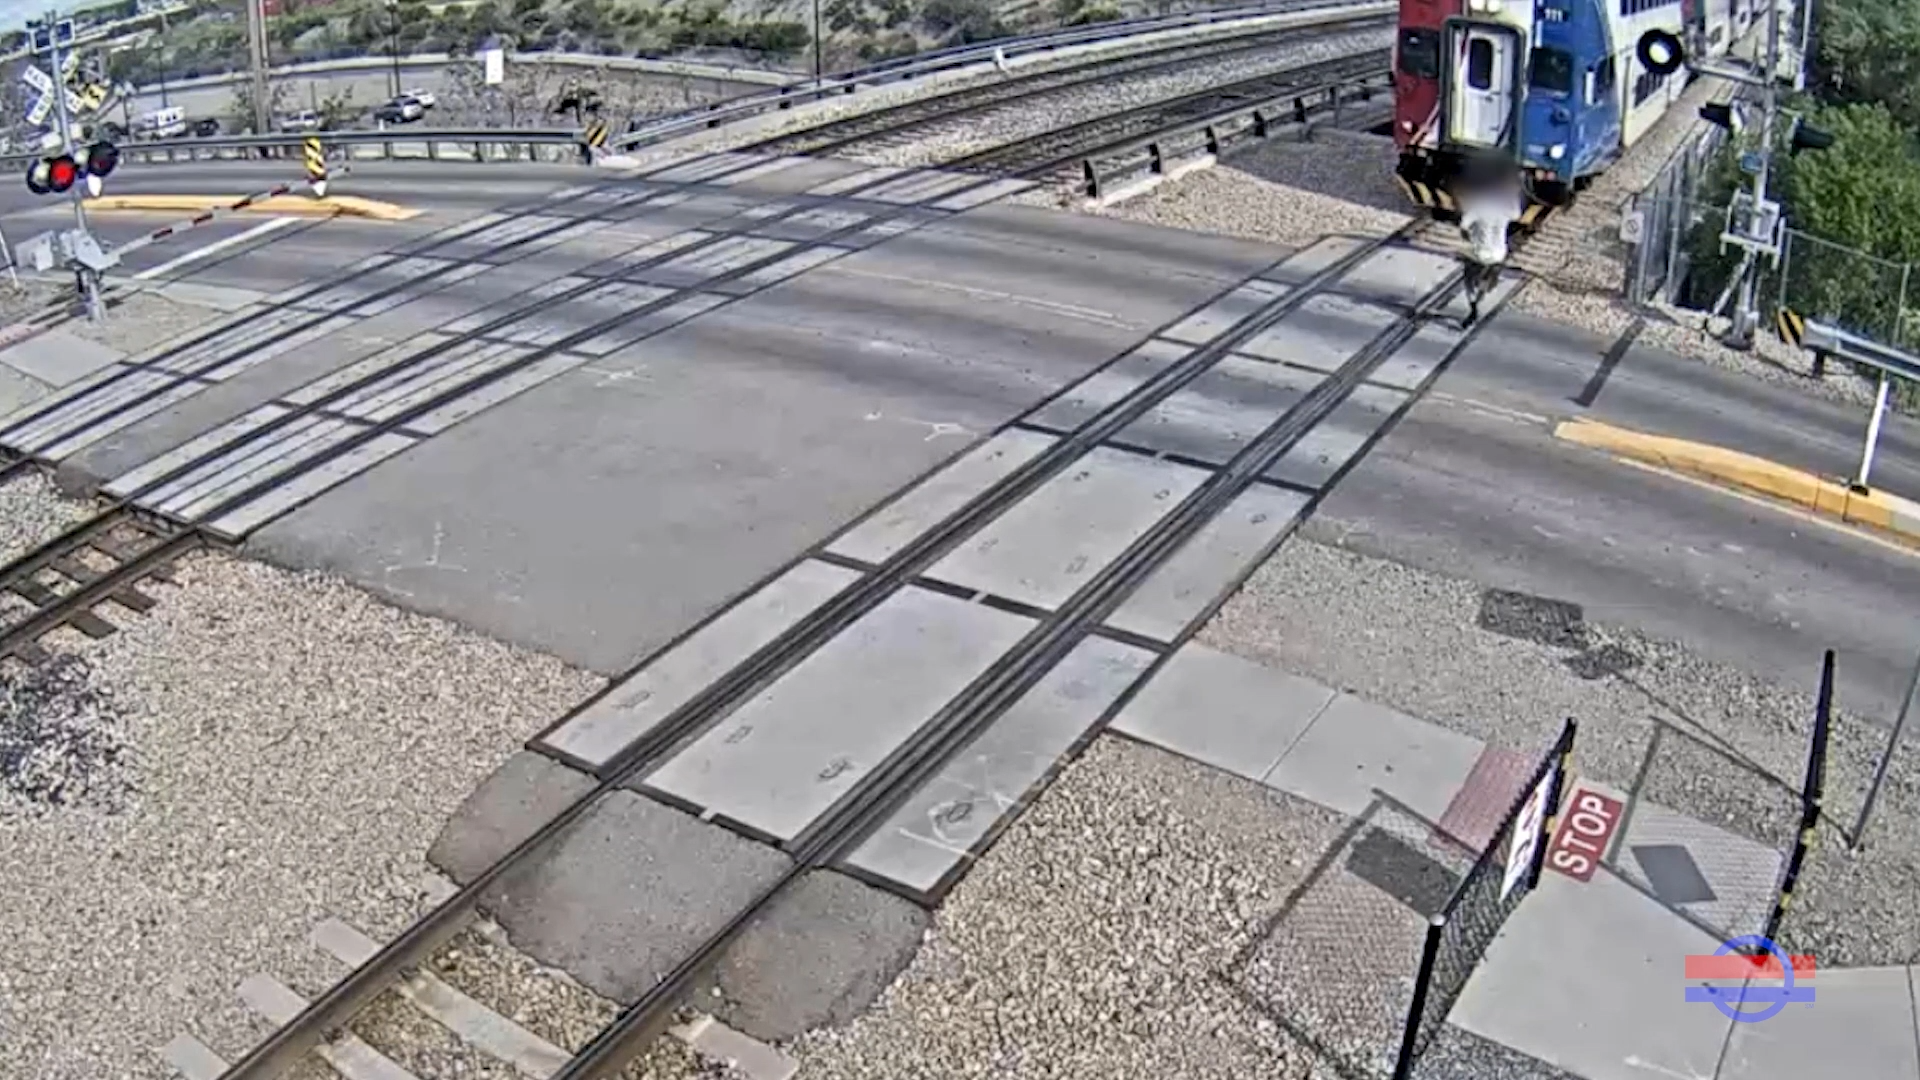 Security video showing a bystander walking across UTA trax lines and almost getting hit...